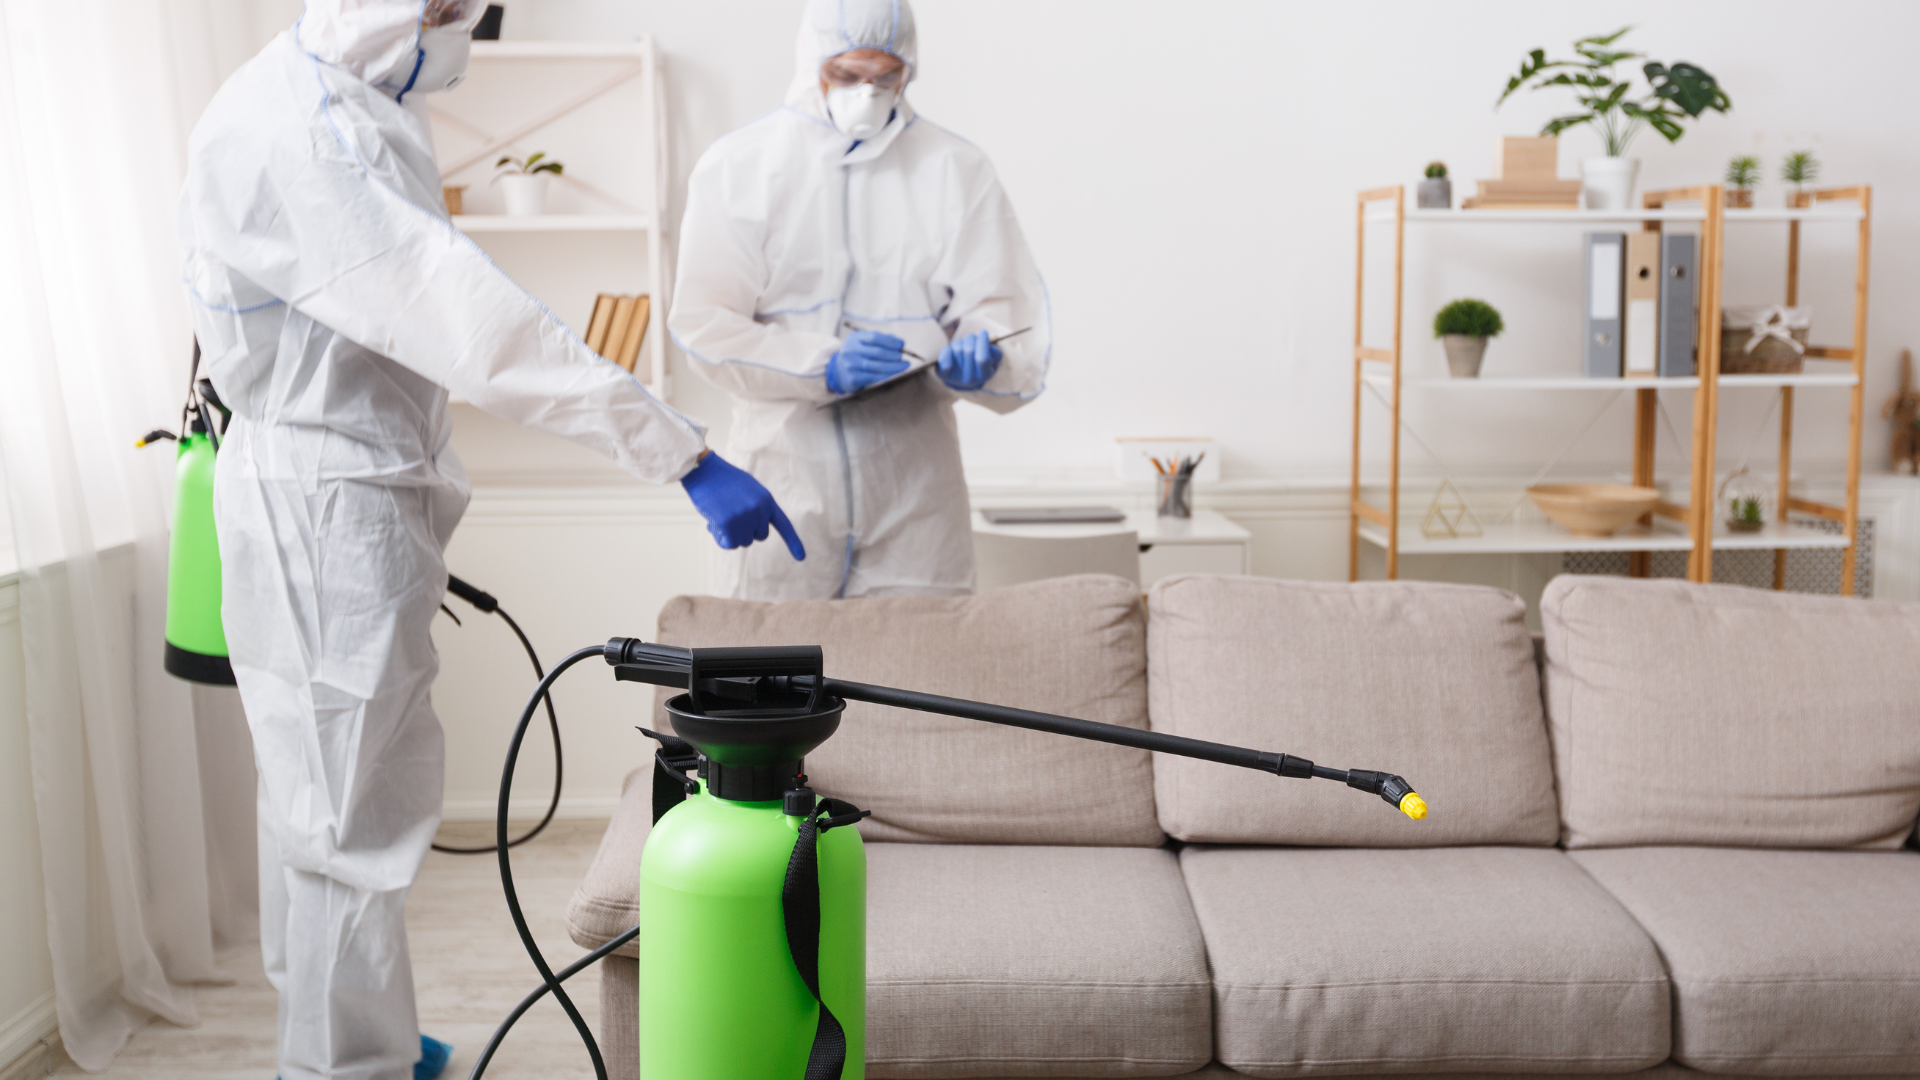  Collect the best offers for your cleaning service. Get fast and quality work done at the best price. : '' 